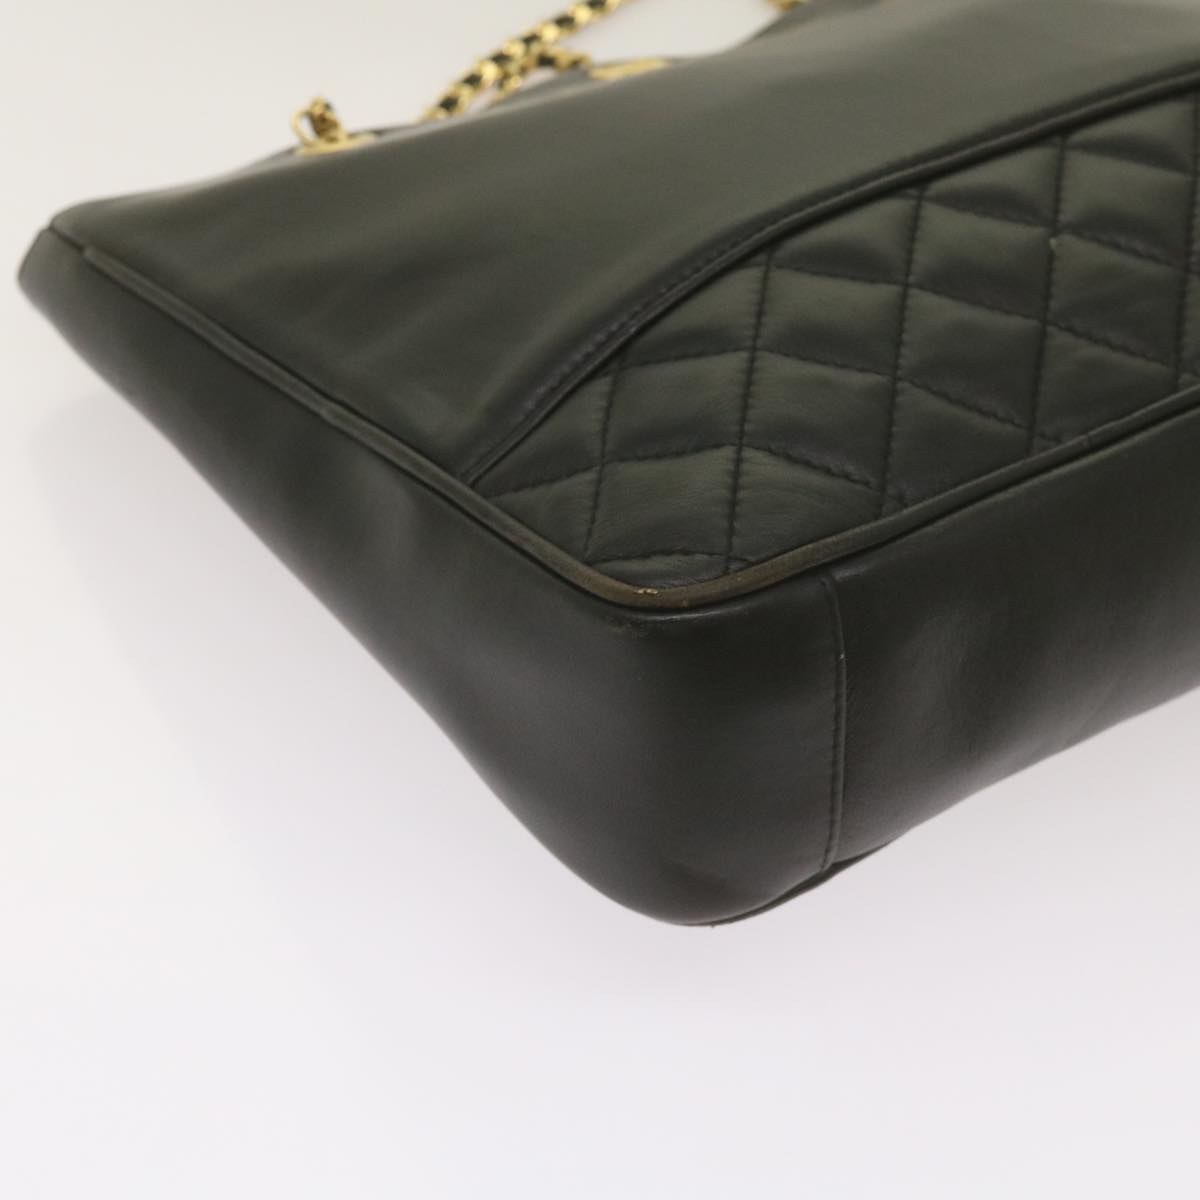 GIVENCHY Quilted Chain Shoulder Bag Leather Black Auth yk10895